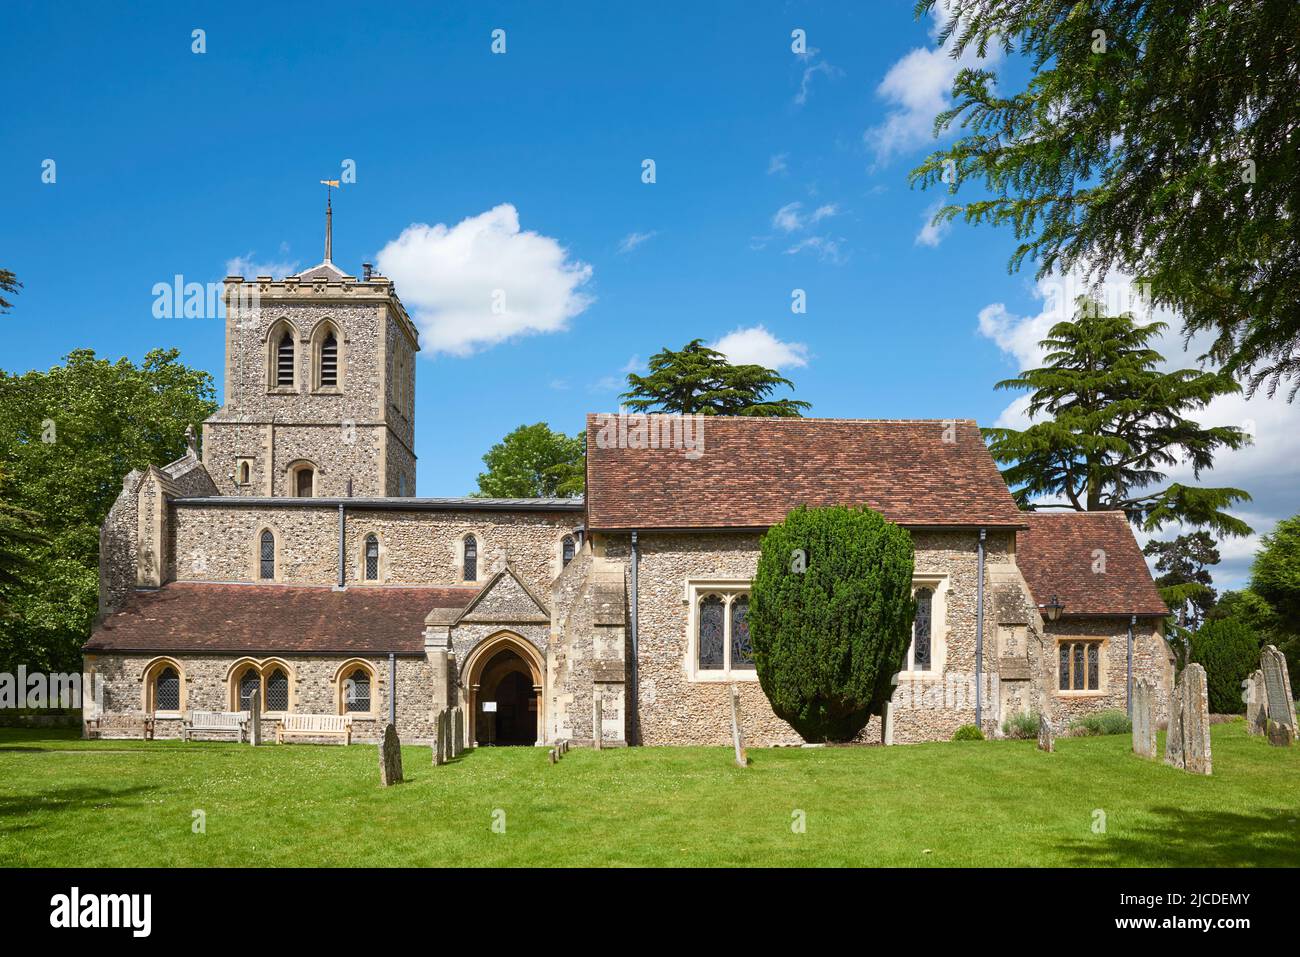 The historic Anglo-Saxon church of St Michael in the city of St Albans, Hertfordshire, UK Stock Photo